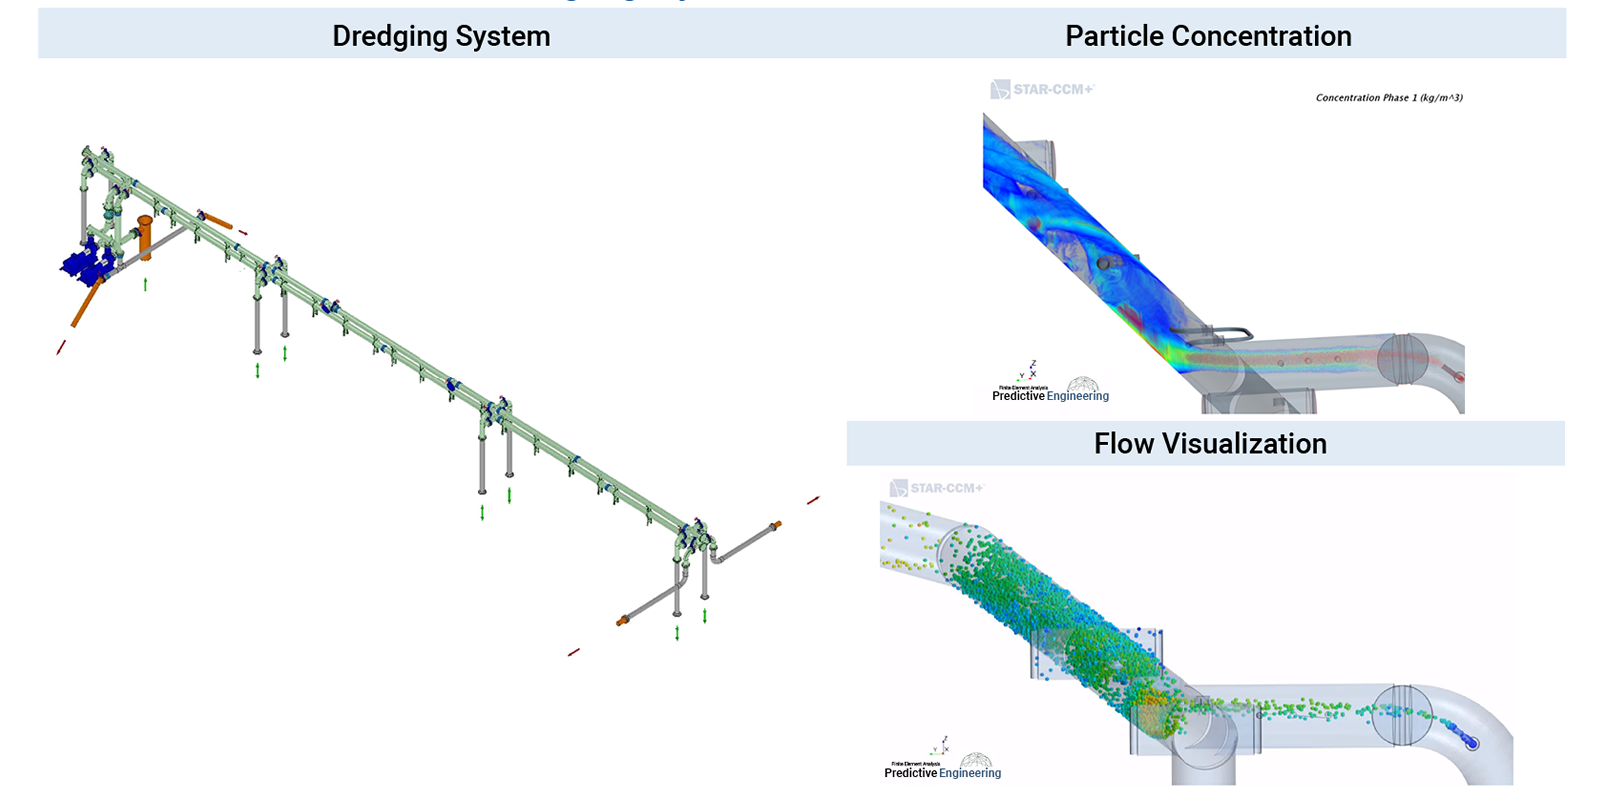 CFD Simulation of Sediment Flow within Dredging System - Predictive Engineering CFD Services